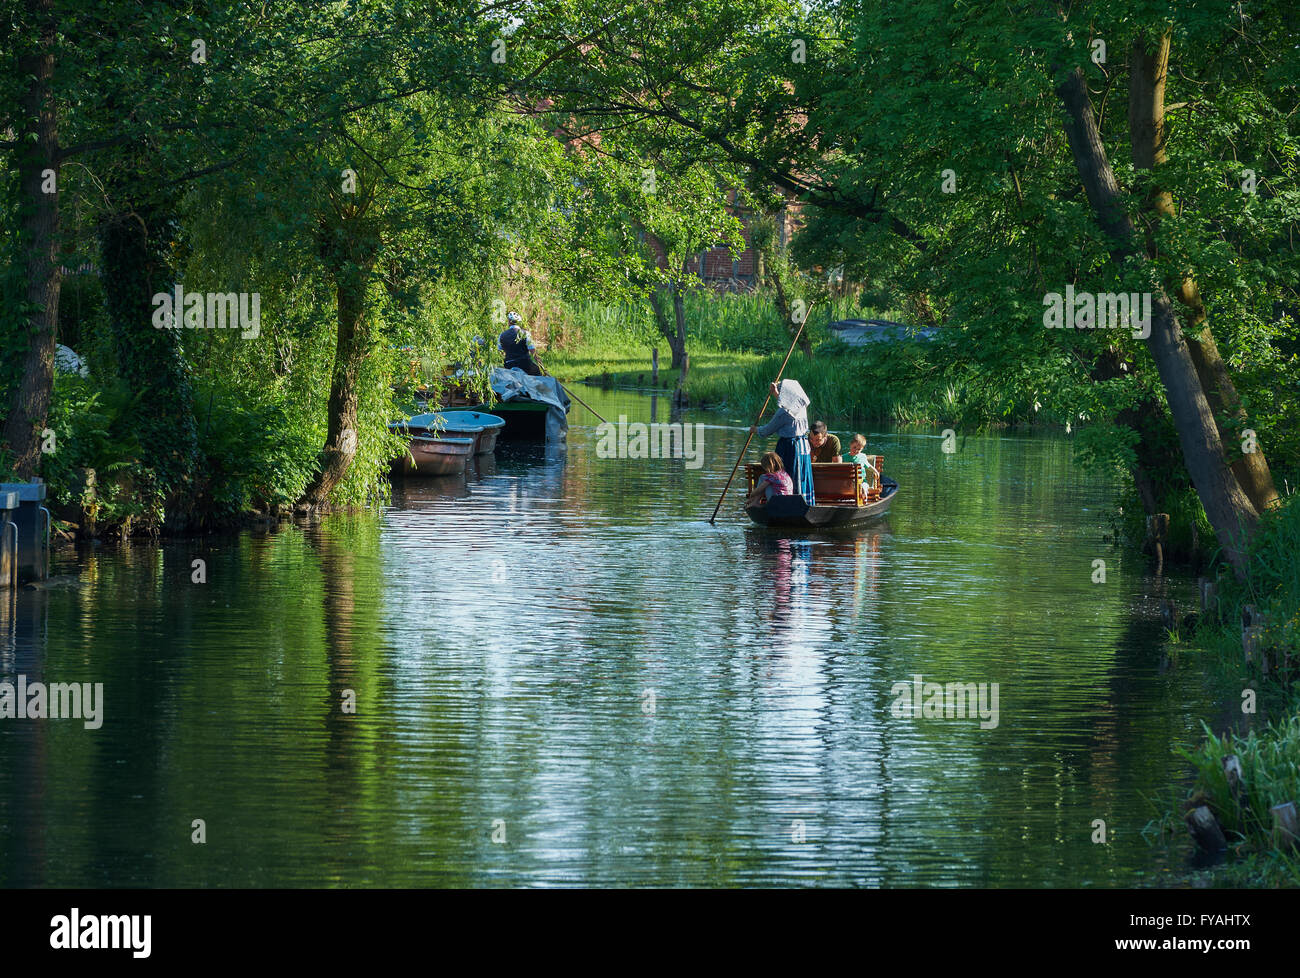 GERMANY, BRANDENBURG, SPREEWALD Woman in traditional dress poling a tourist boat through the spreewald channels at Schlepzig Stock Photo